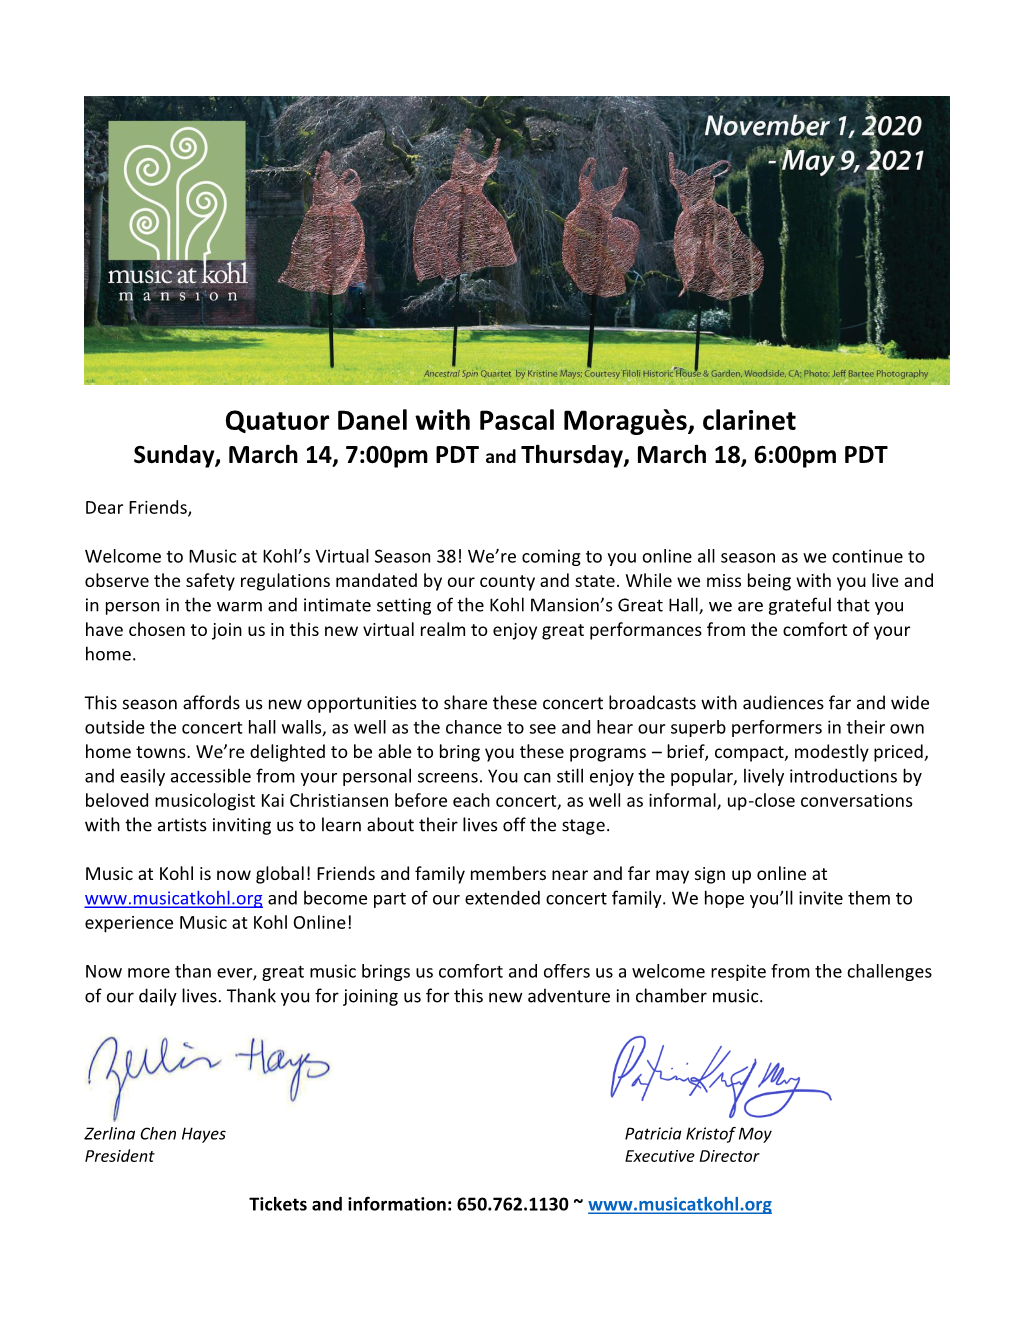 Quatuor Danel with Pascal Moraguès, Clarinet Sunday, March 14, 7:00Pm PDT and Thursday, March 18, 6:00Pm PDT